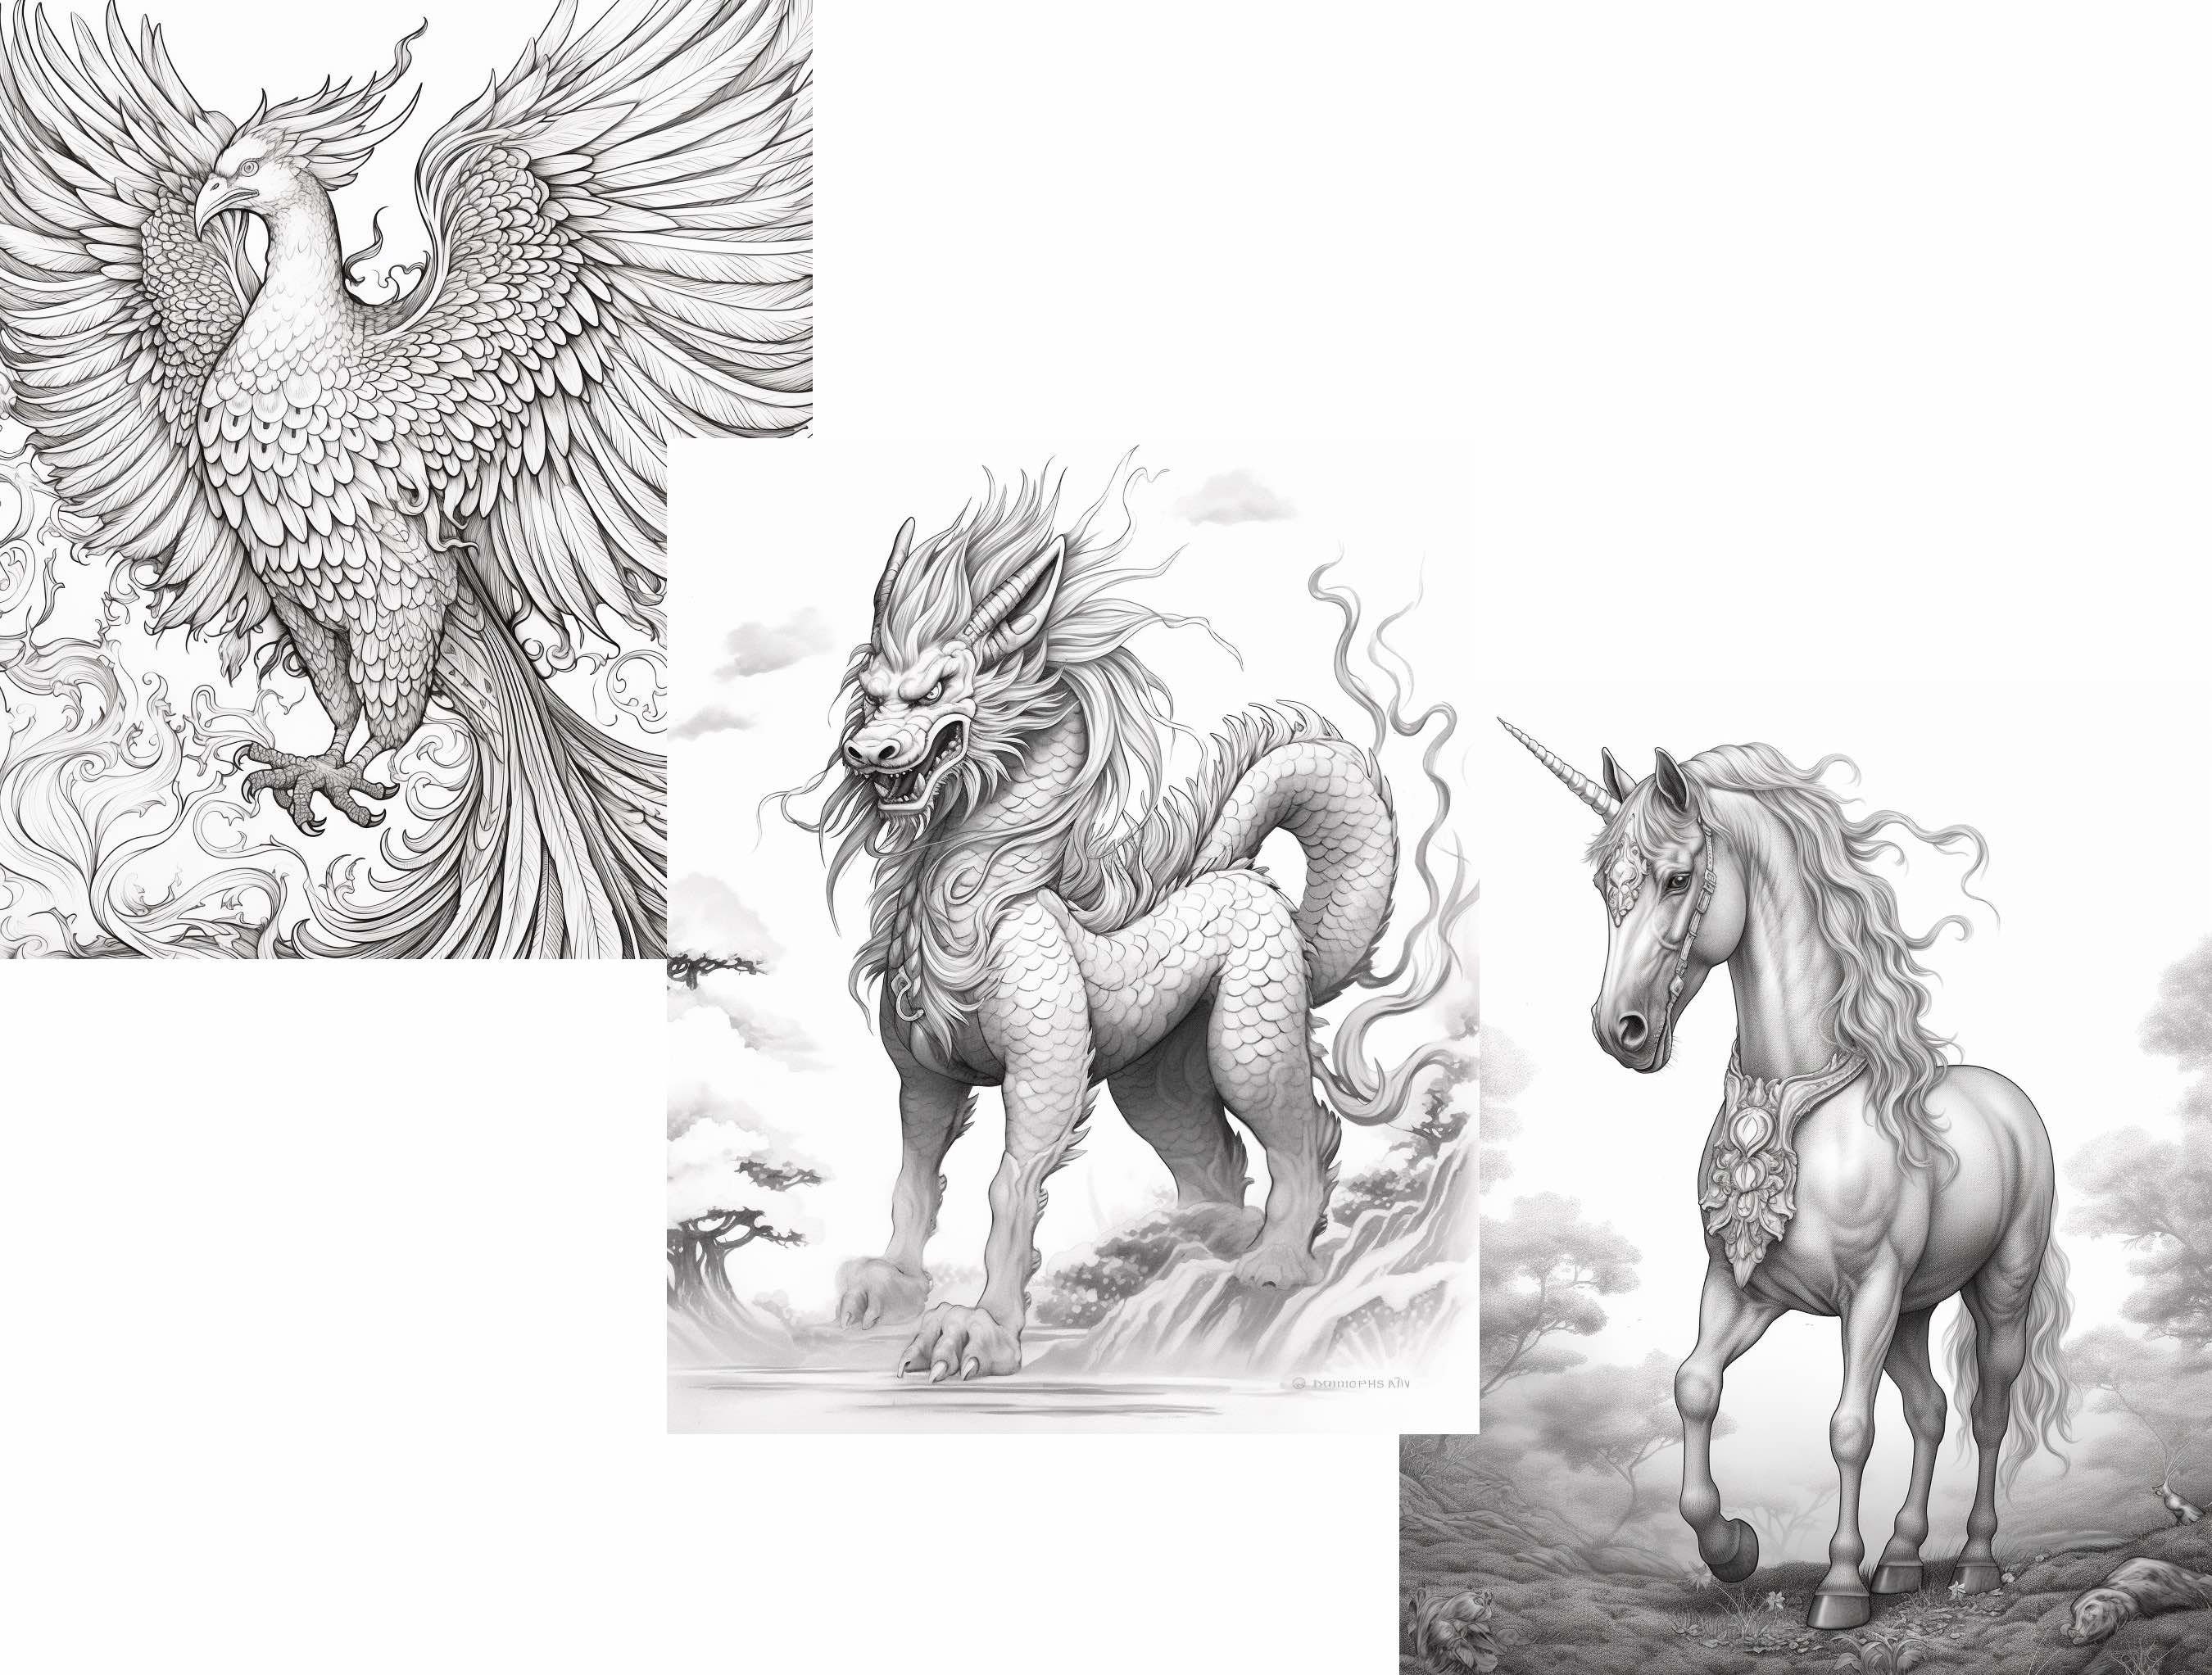 Mythological Creatures Line Spiral Coloring Book: 33 Illustrations With  Fantastic Creatures for Fans of Mythology (Spiroglyphics Coloring Book)